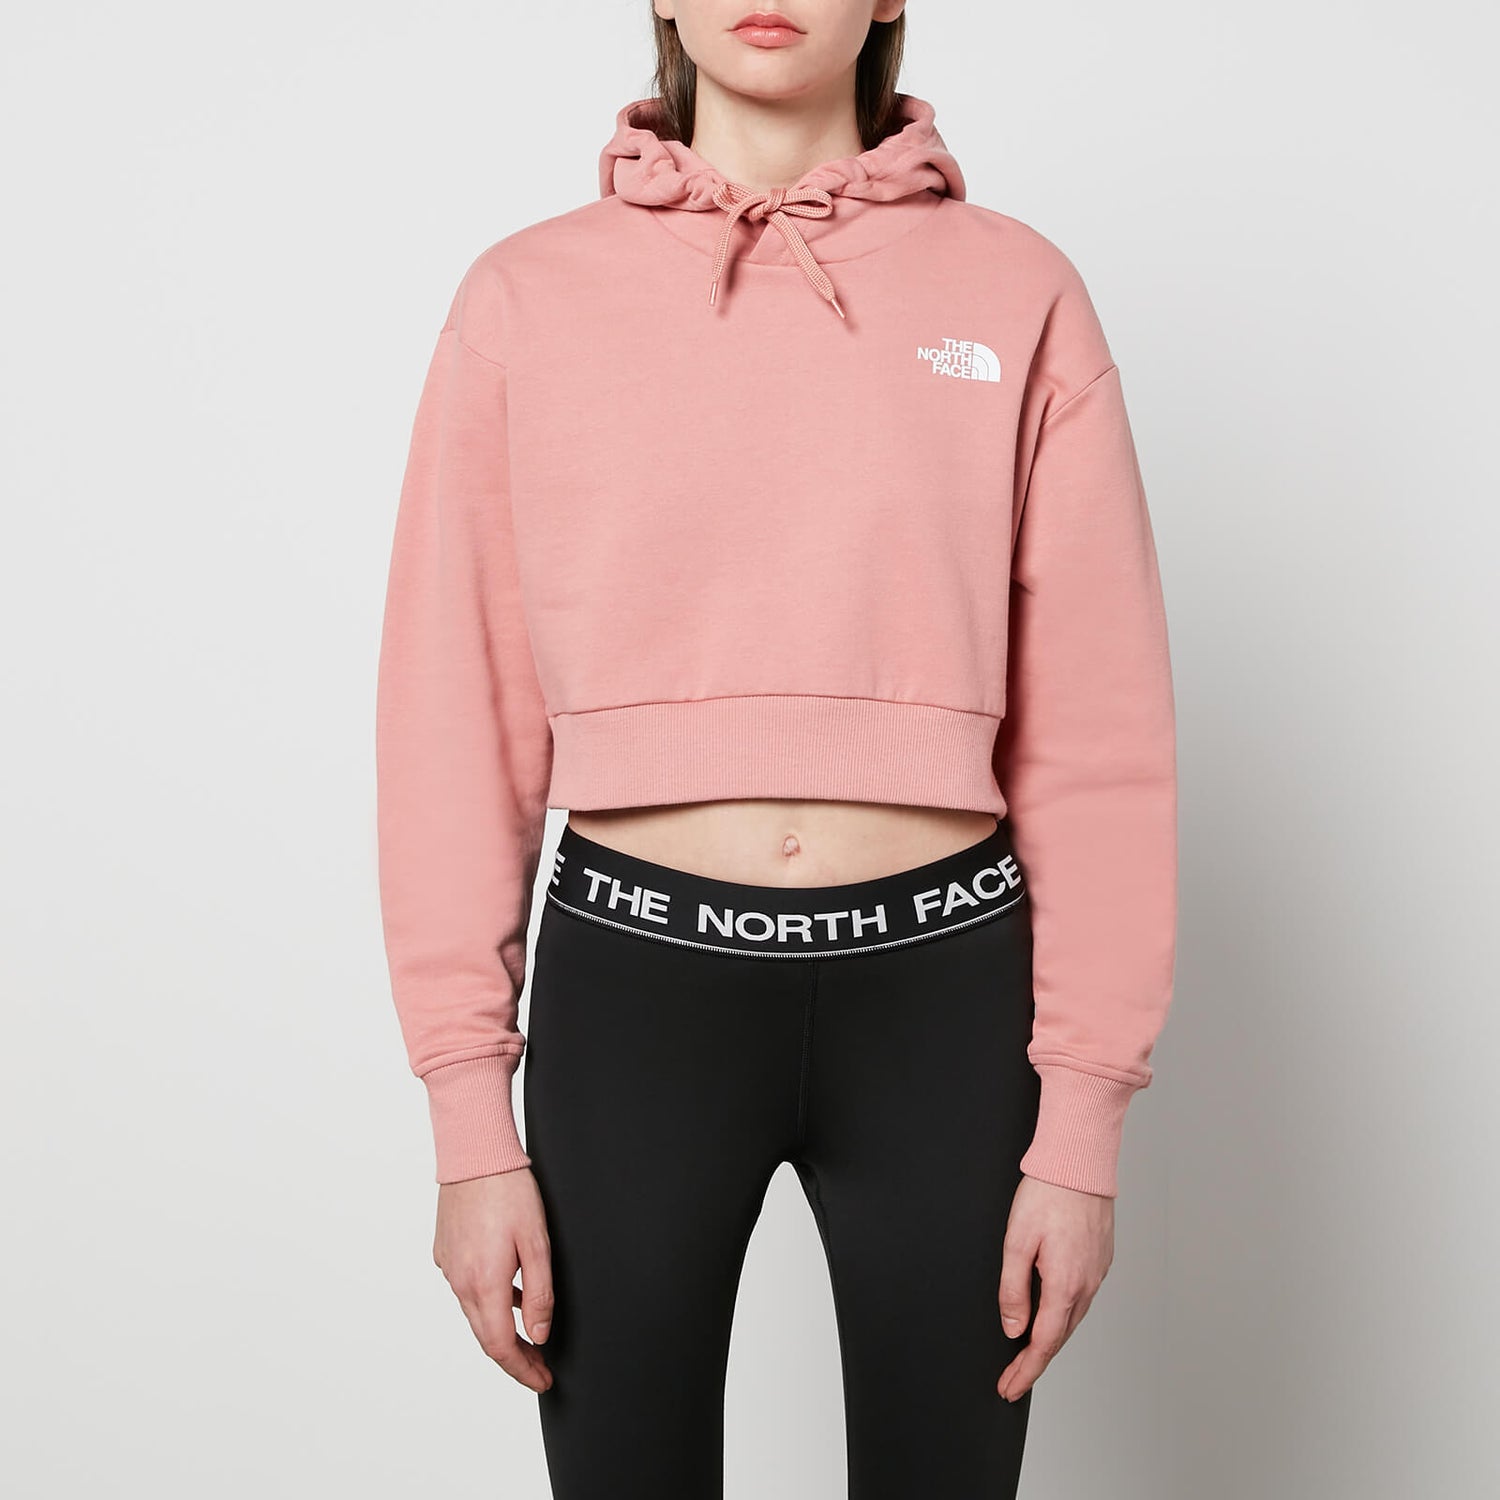 The North Face Women's Trend Crop Hoodie - Rose Dawn - XS